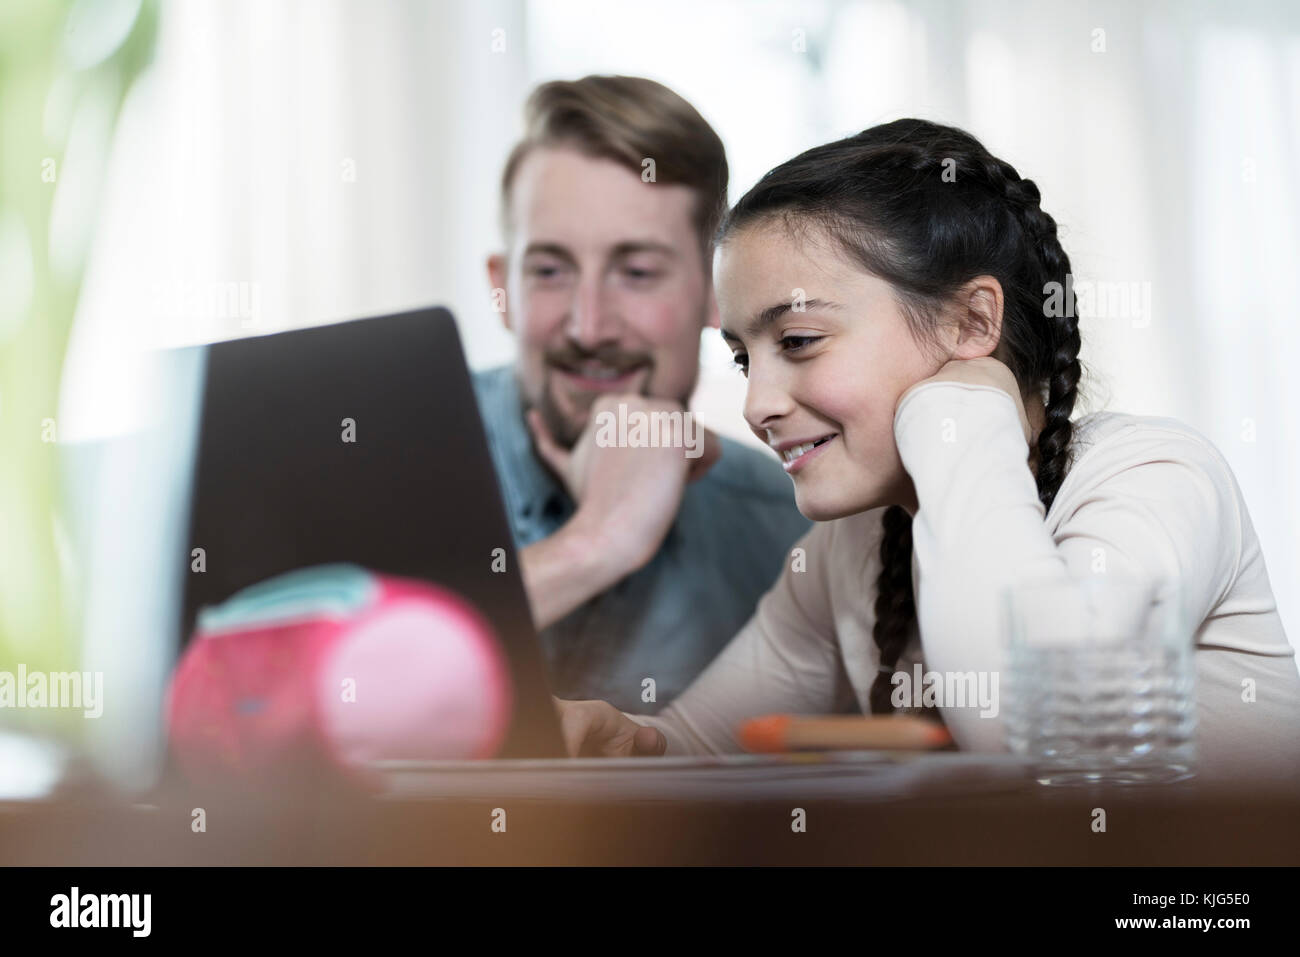 Father and daughter looking at laptop together Stock Photo